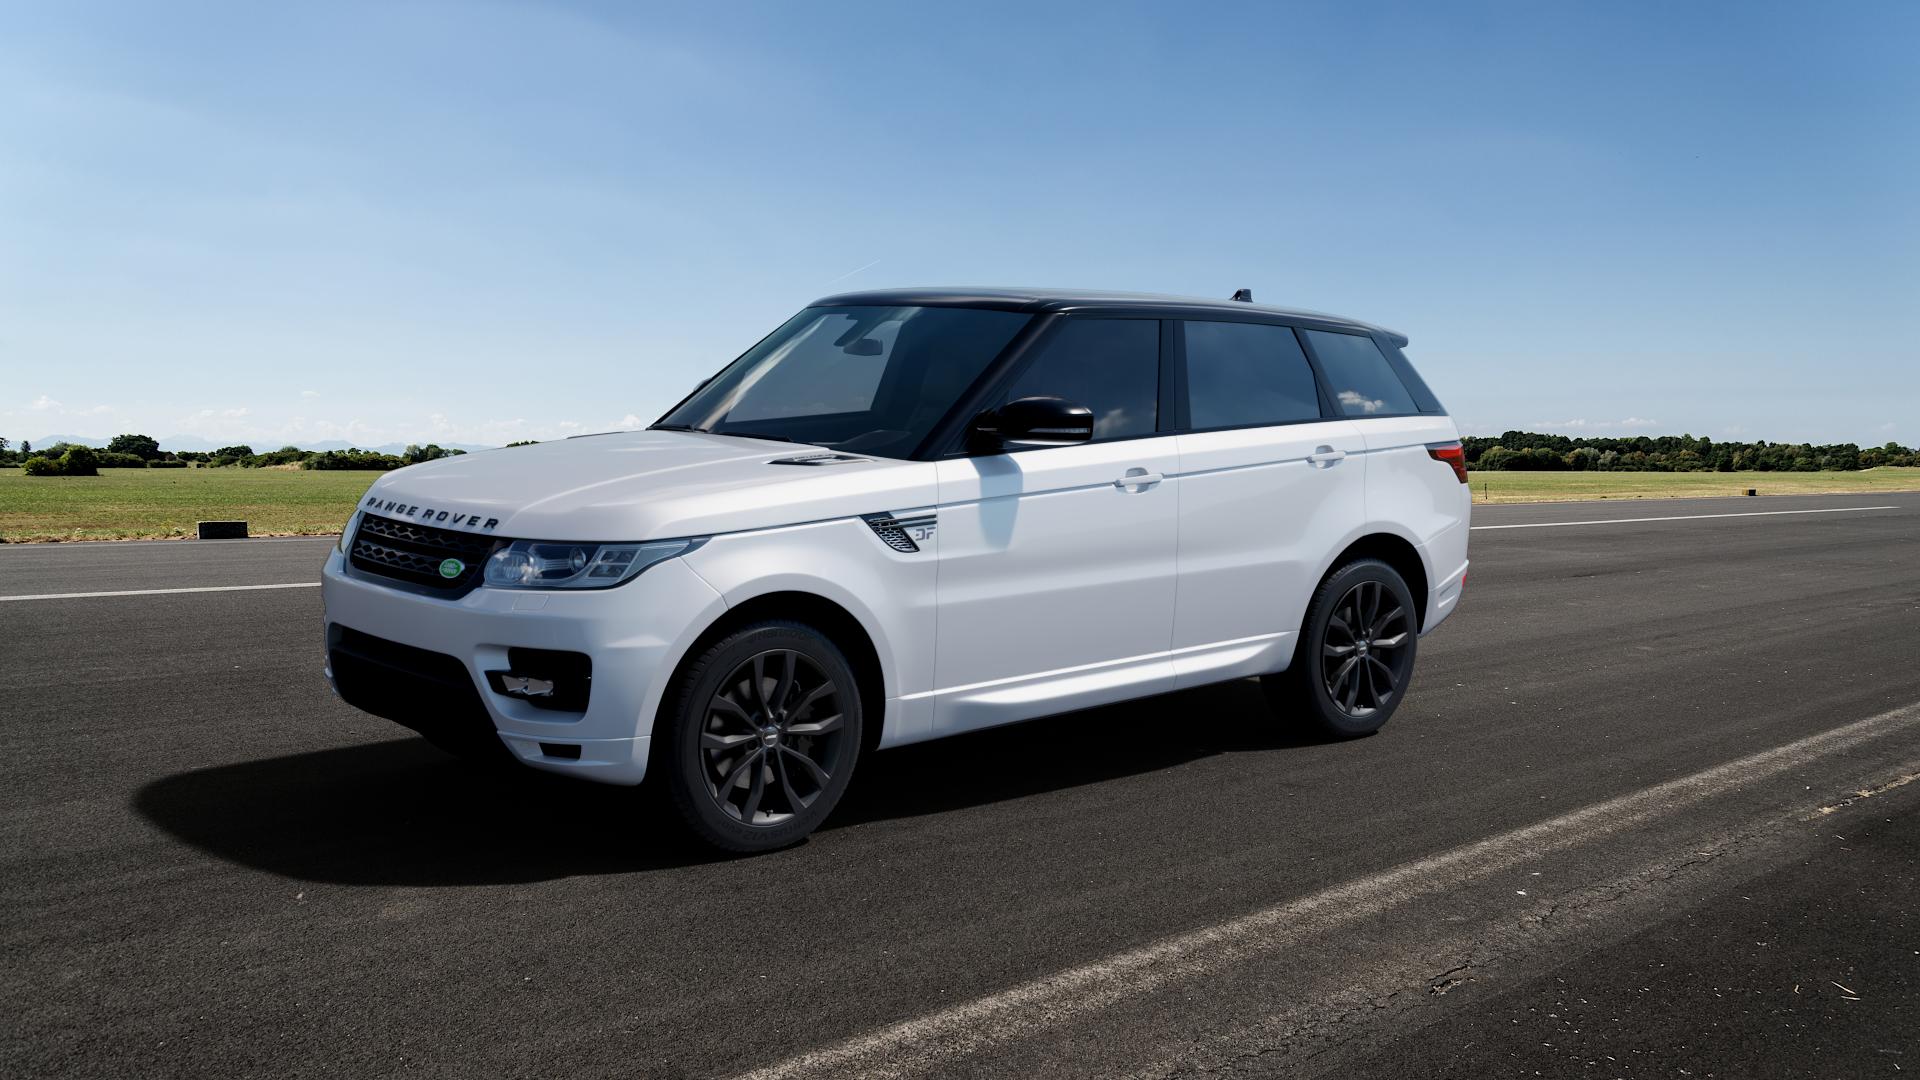 Land Rover Range Rover Sport Type LW 3,0l TD V6 190kW (258 hp) Wheels and  Tyre Packages | velonity.com